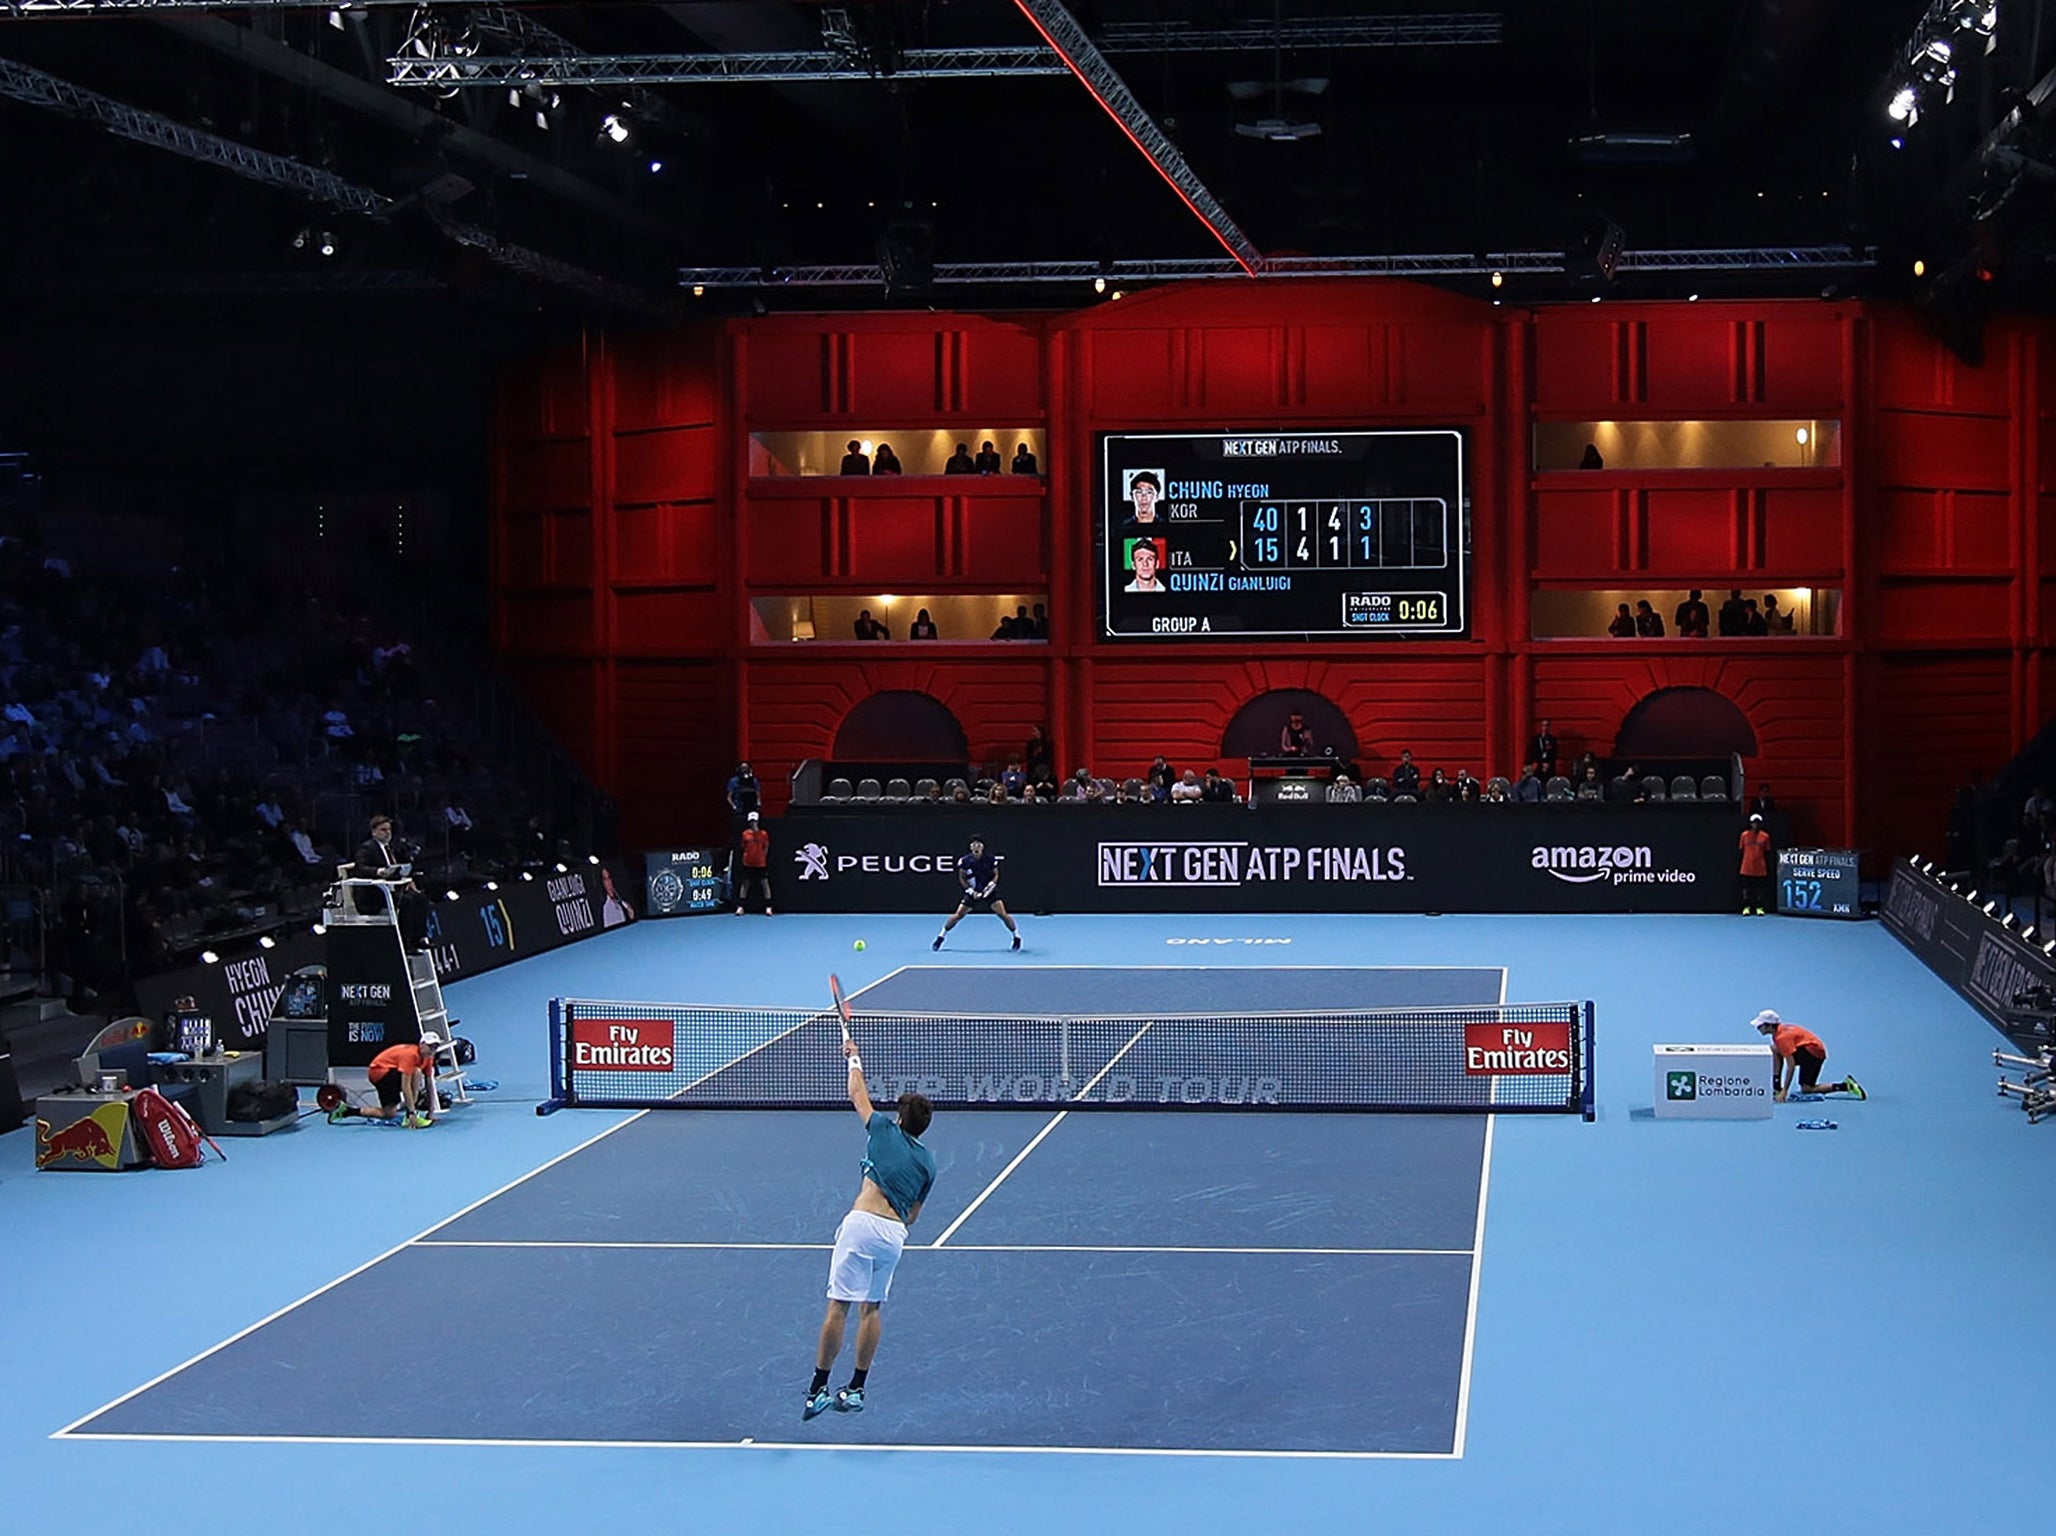 The tournament has been billed as “tennis re-imagined”